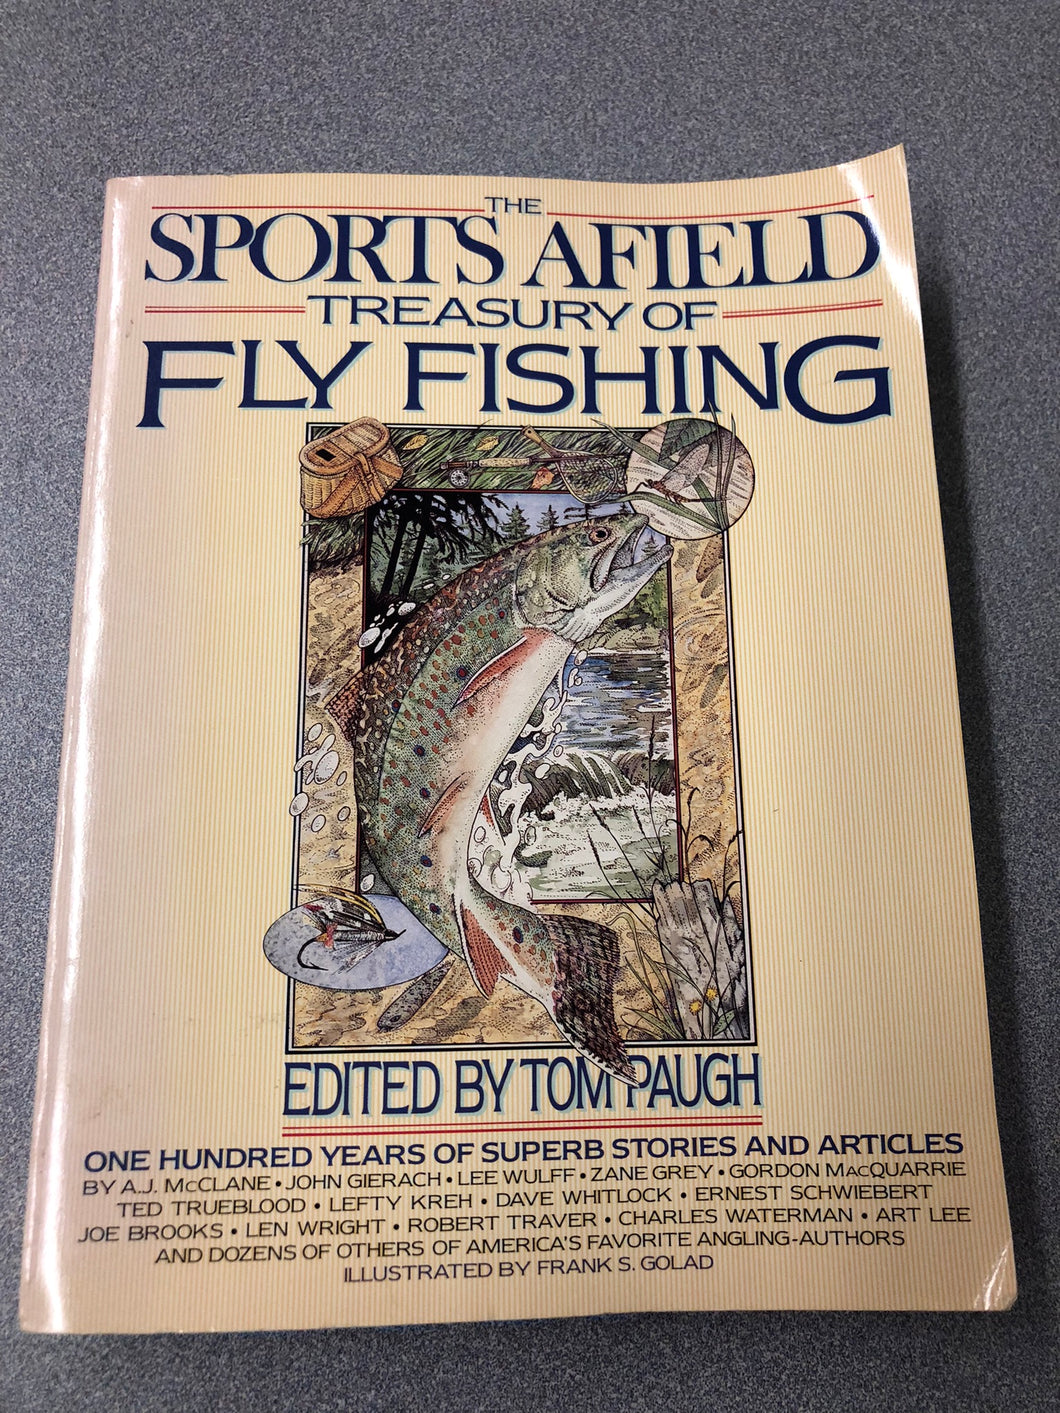 The Sports Afield Treasury of Fly Fishing: One Hundred Years of Superb Stories and Articles, Paugh, Tom, ed [1989] OU 5/22